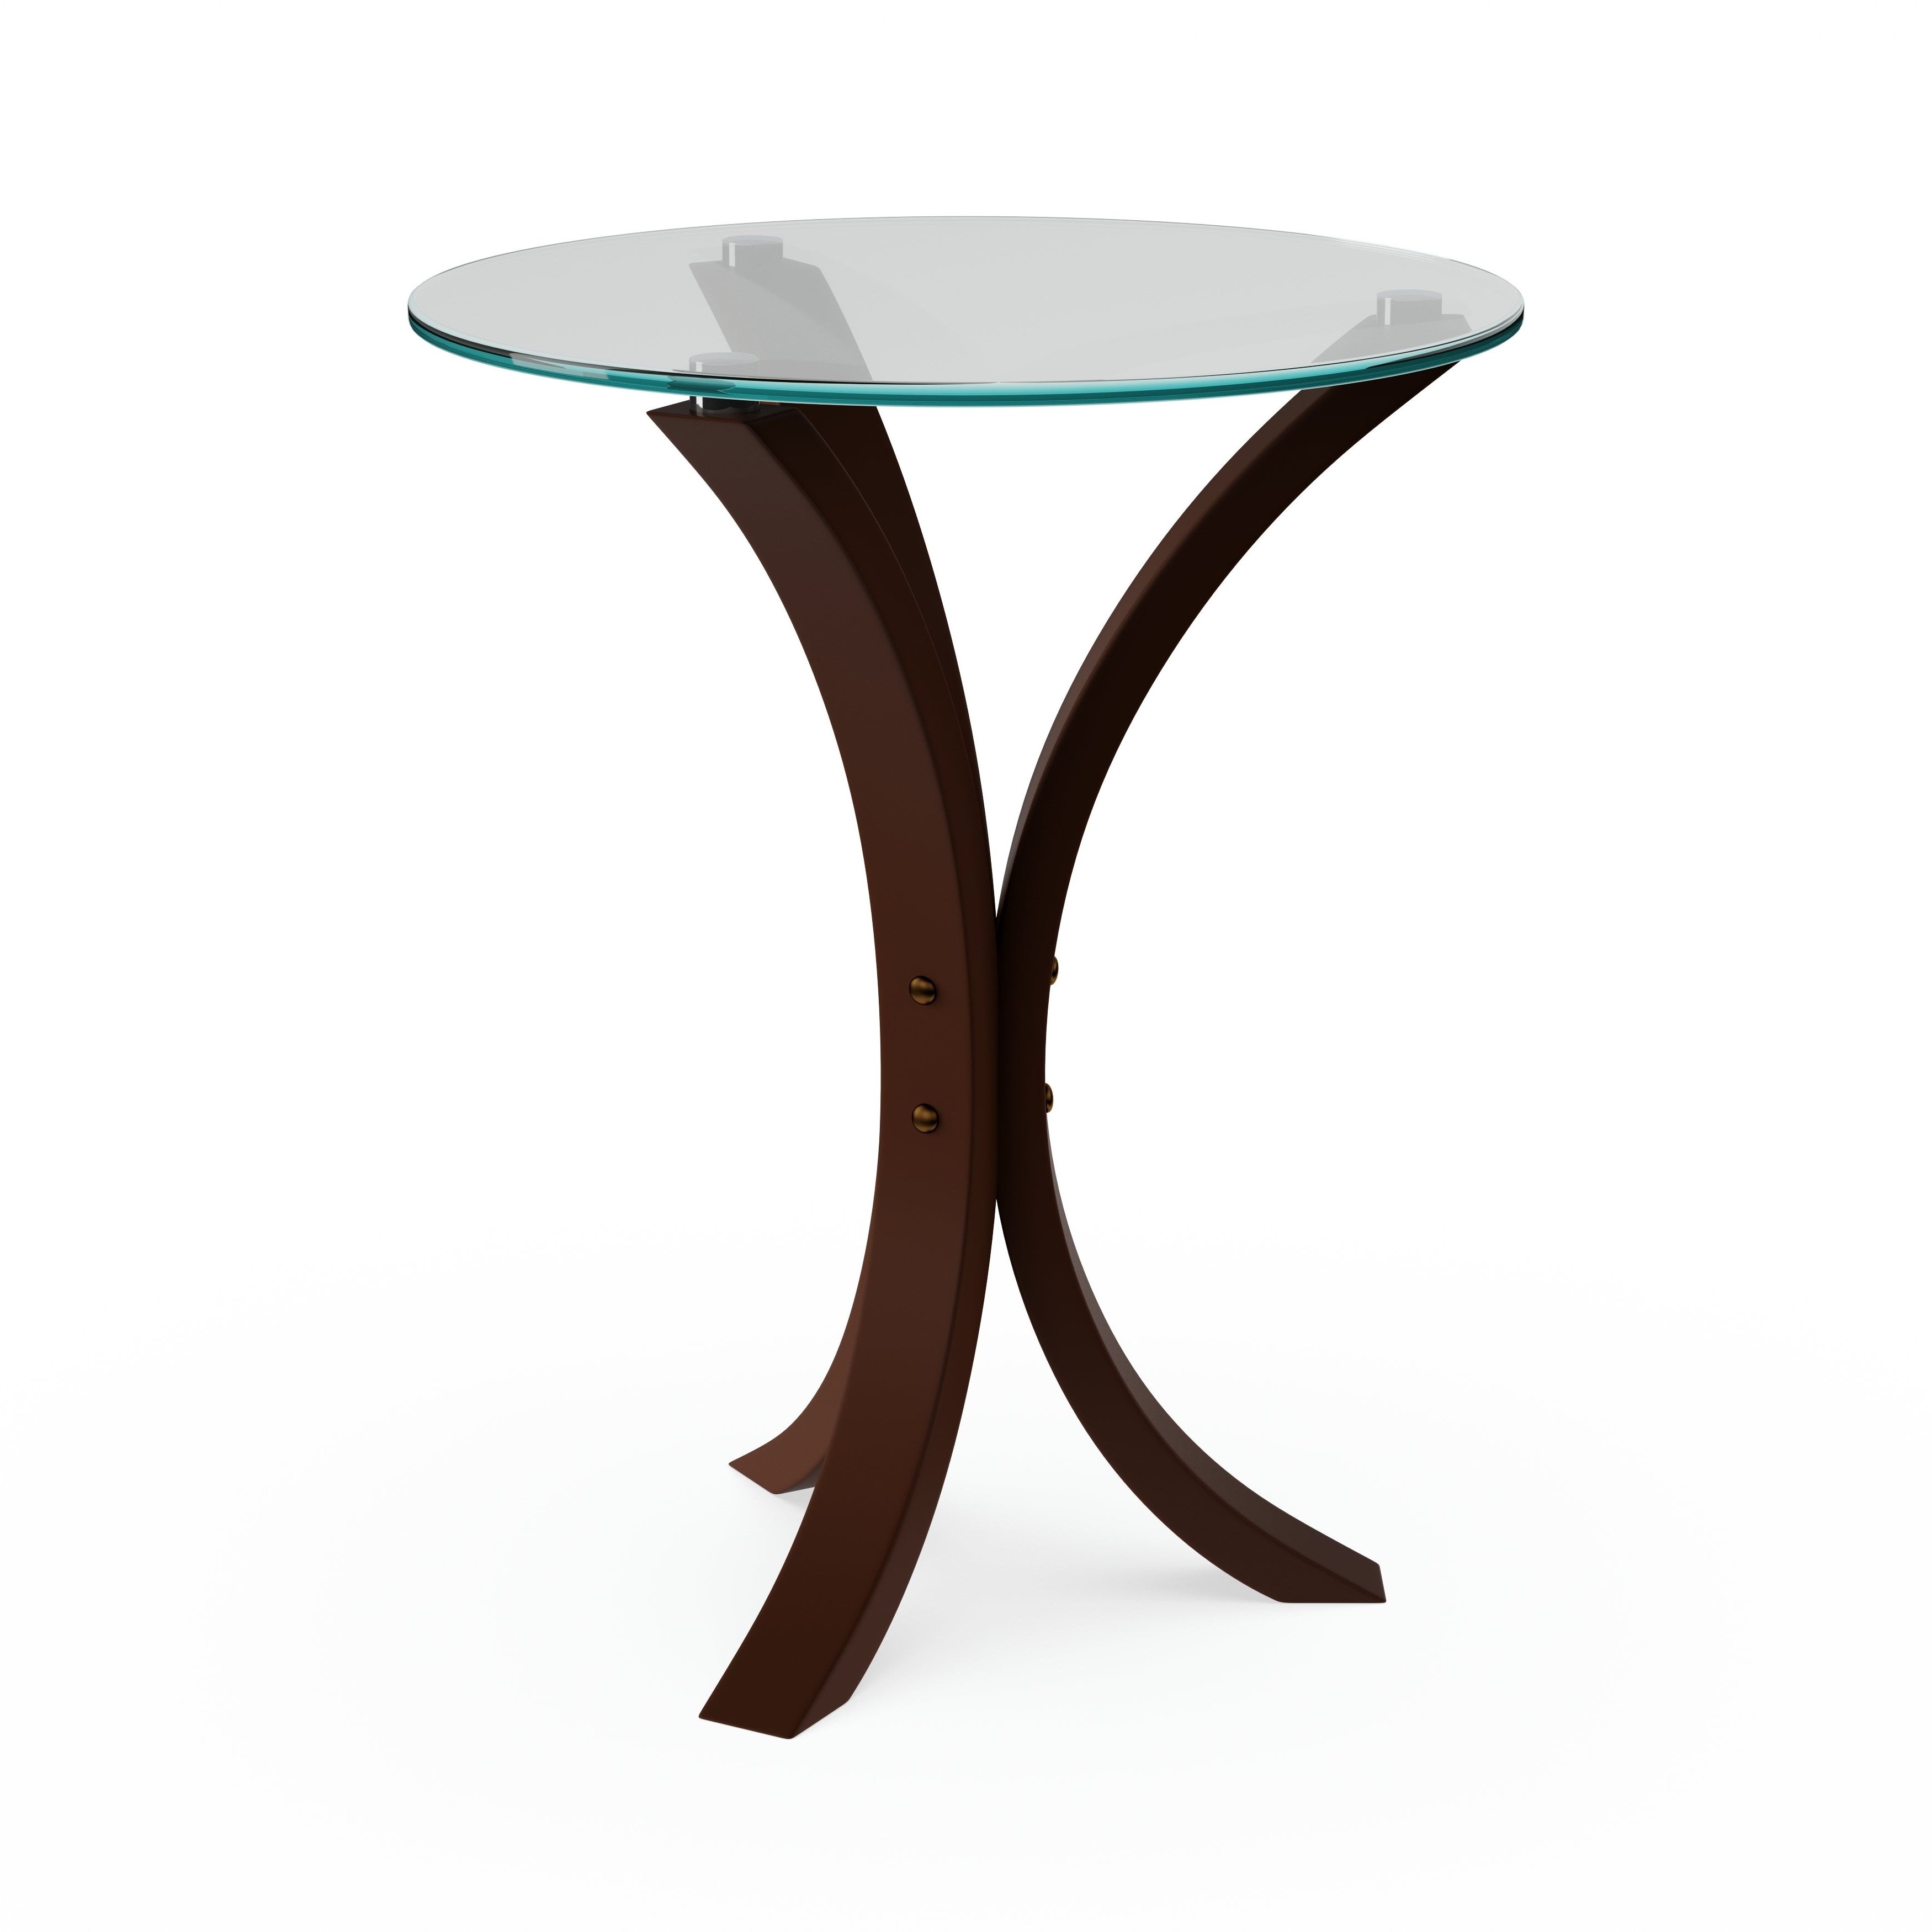 Copper Grove Rochon Glass Top Wood Accent Table In Favorite Porch &amp; Den Shilshole Tempered Glass Bentwood Accent Tables (View 4 of 20)